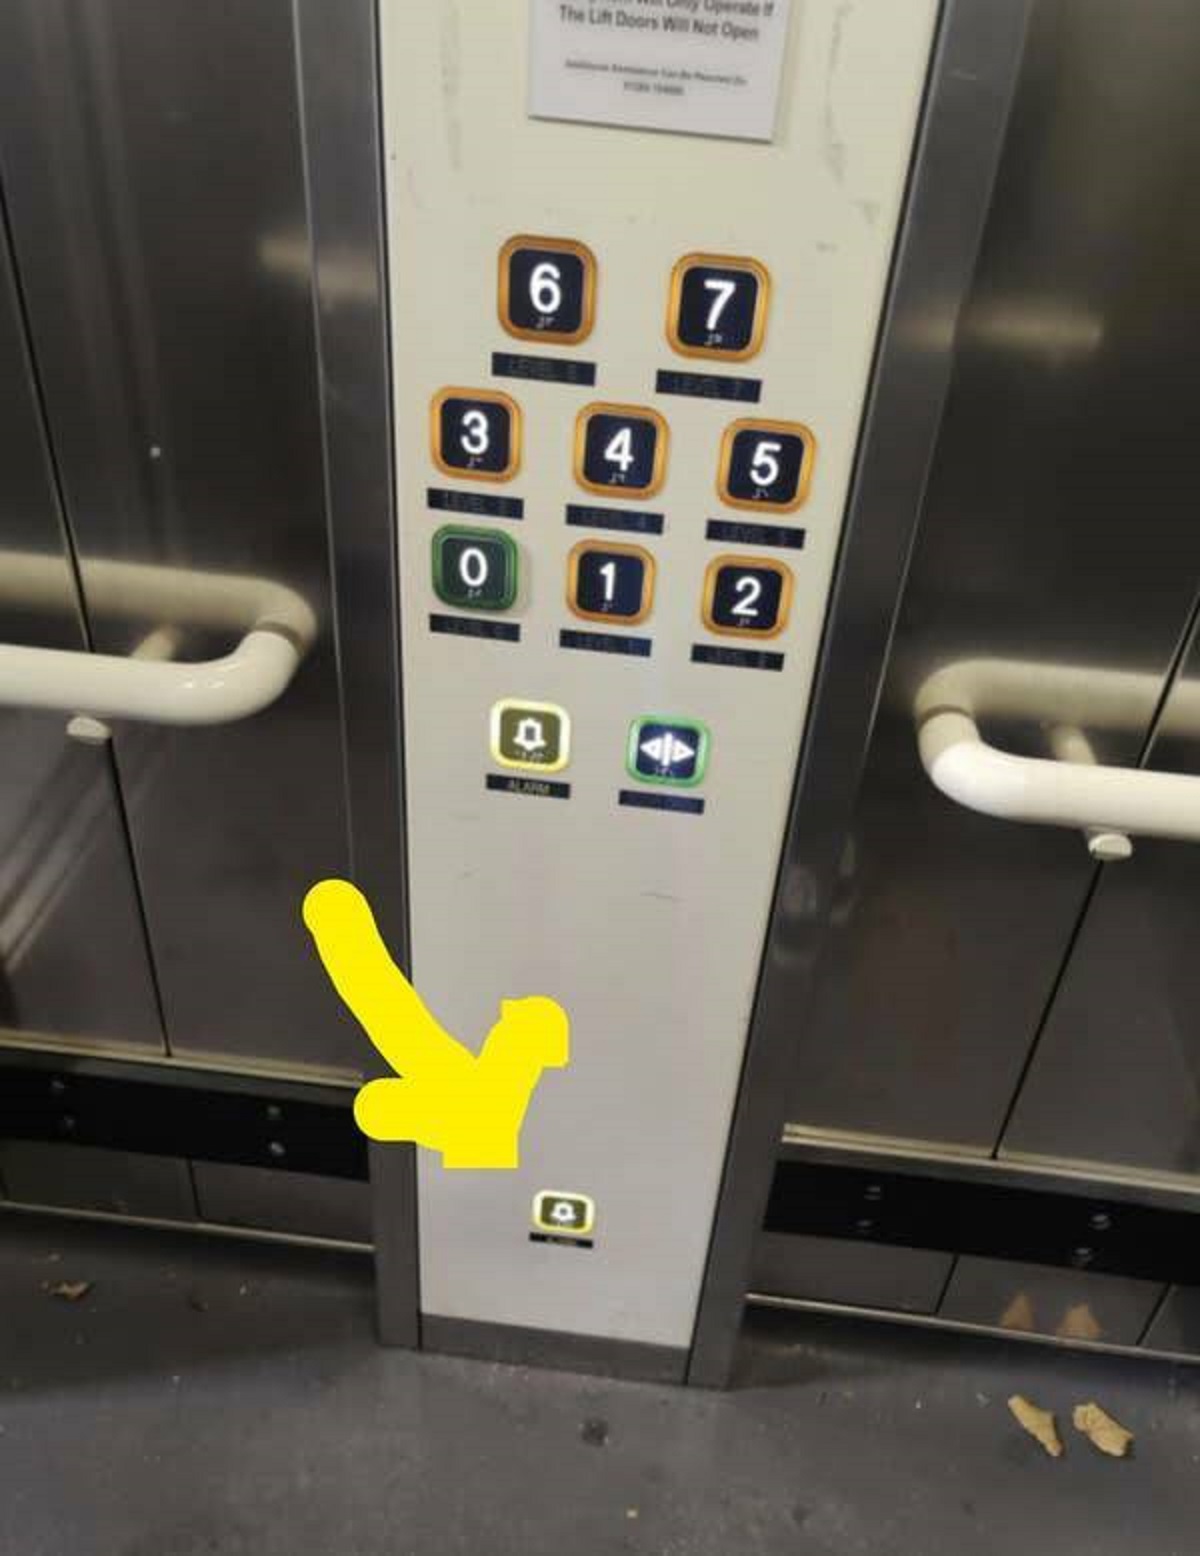 In the UK, there are emergency buttons on elevator floors in case you've collapsed.